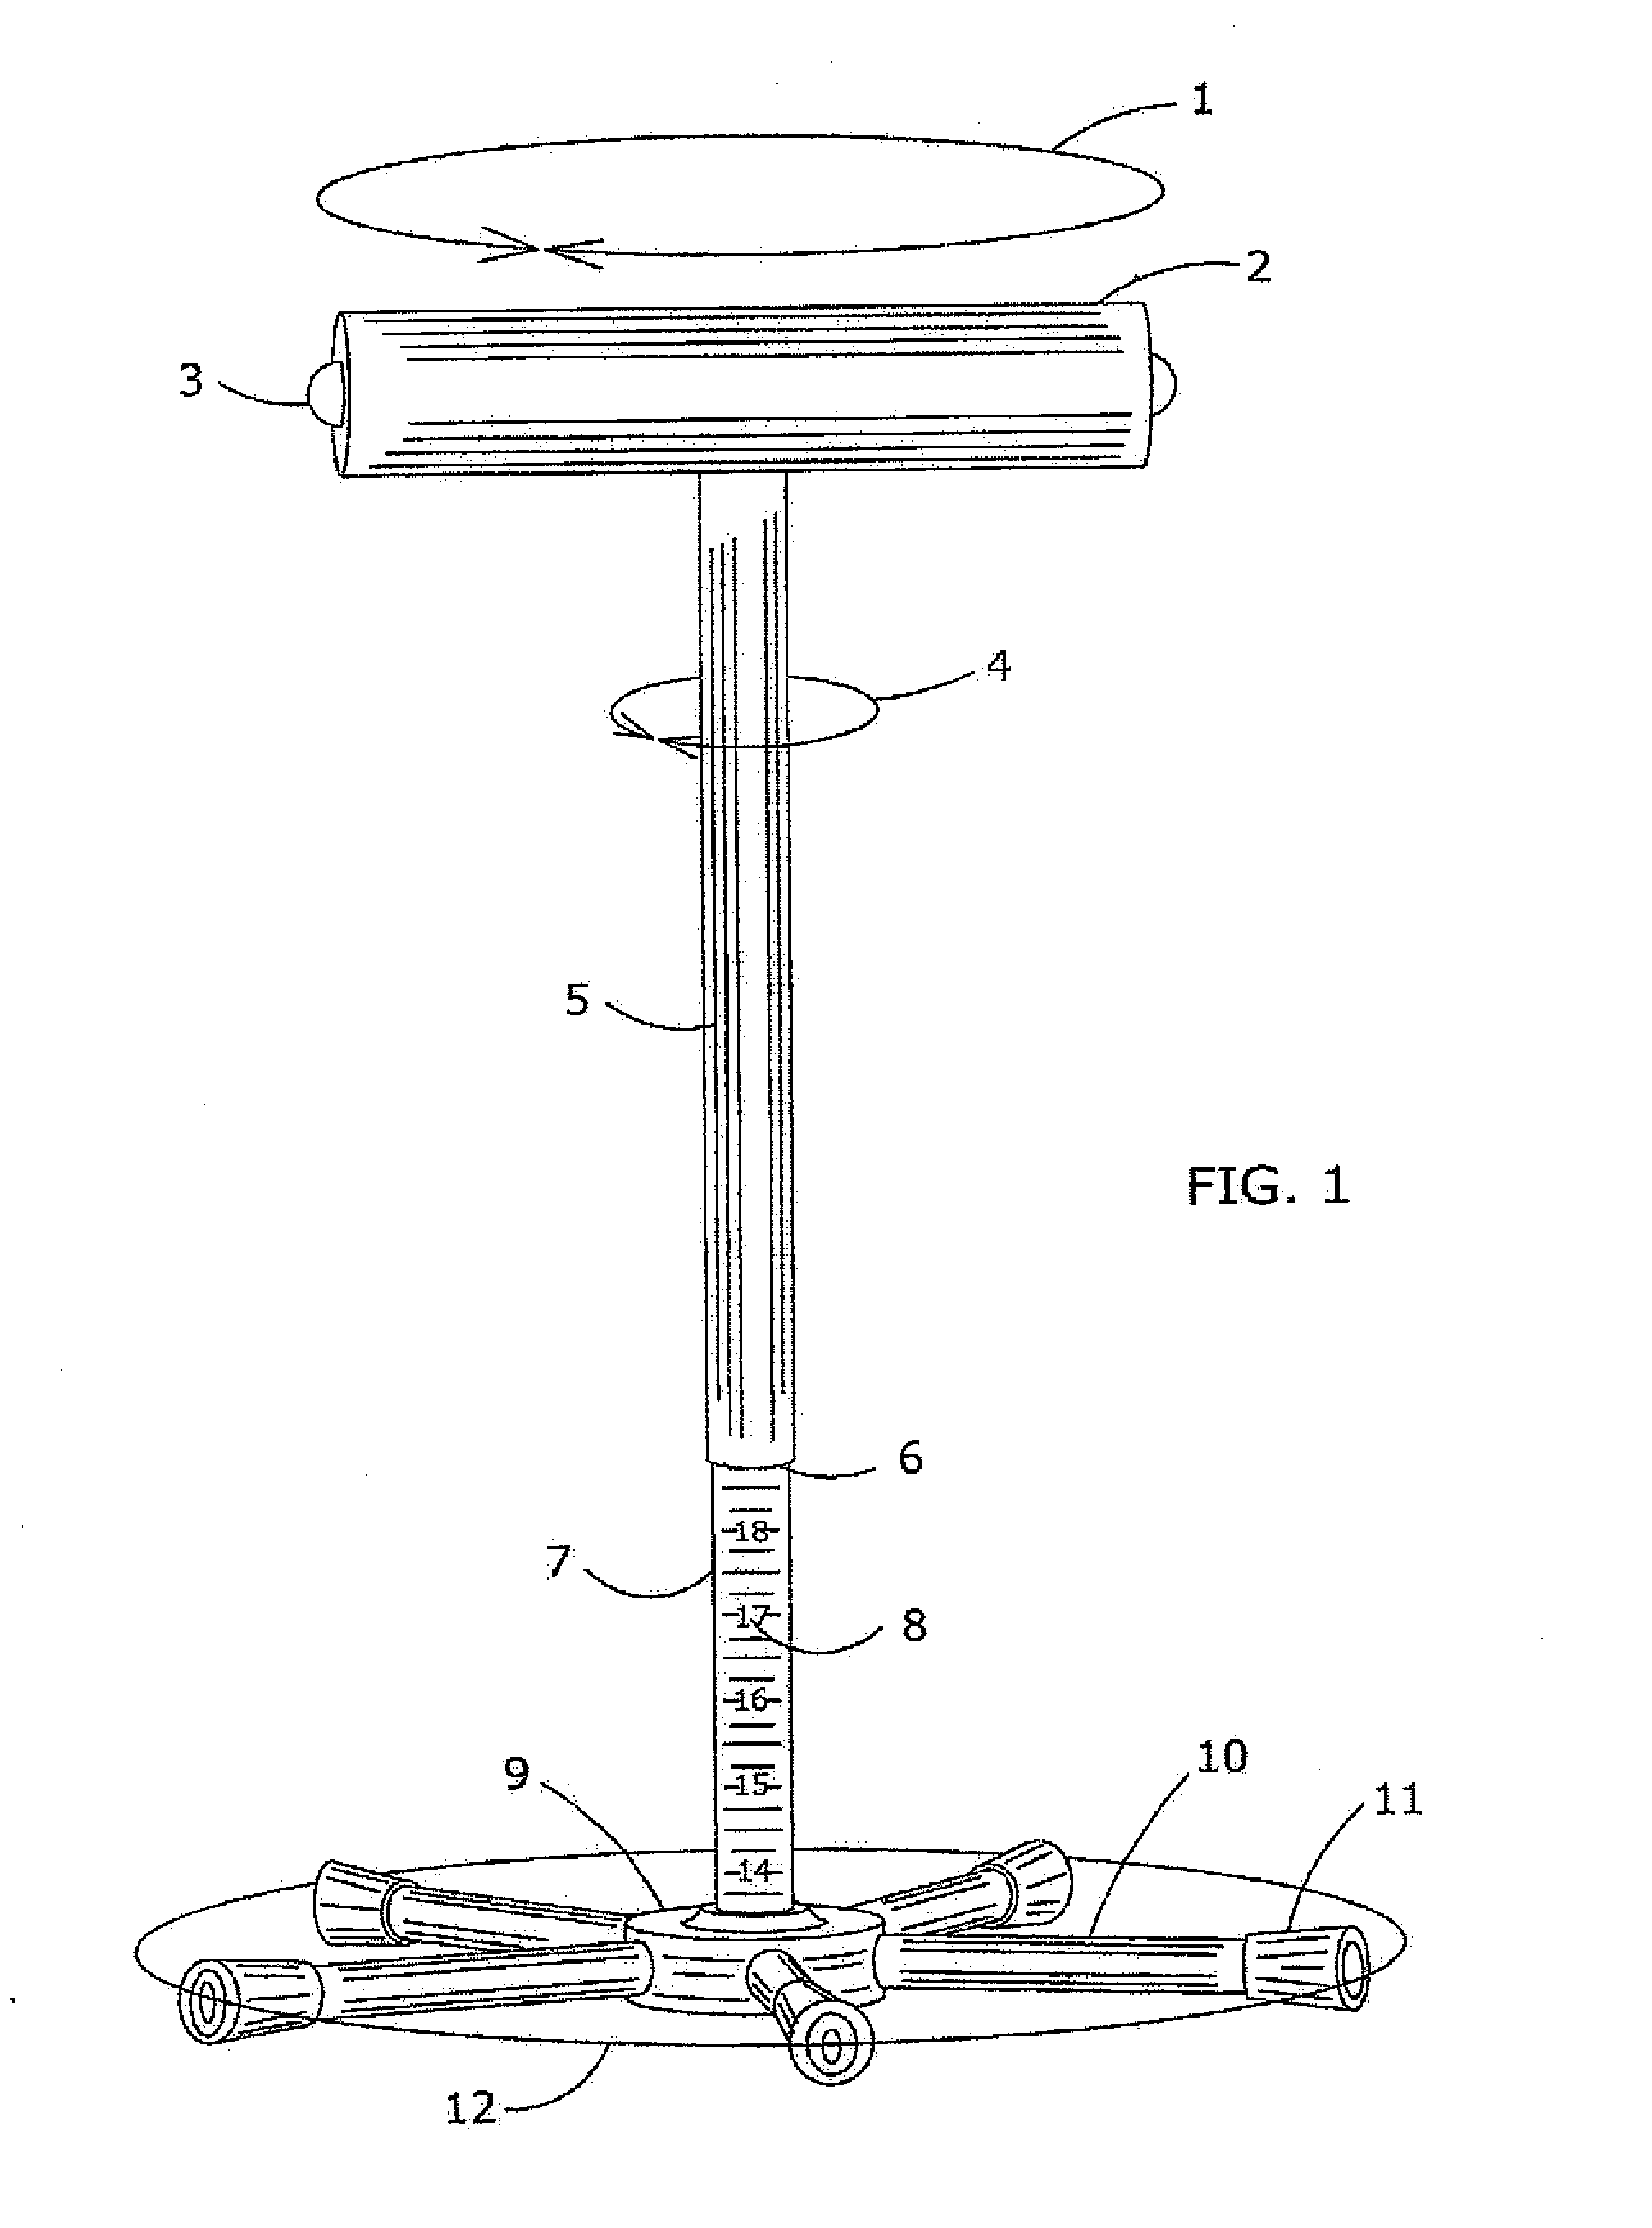 Passive Knee Joint and Knee Extension Device